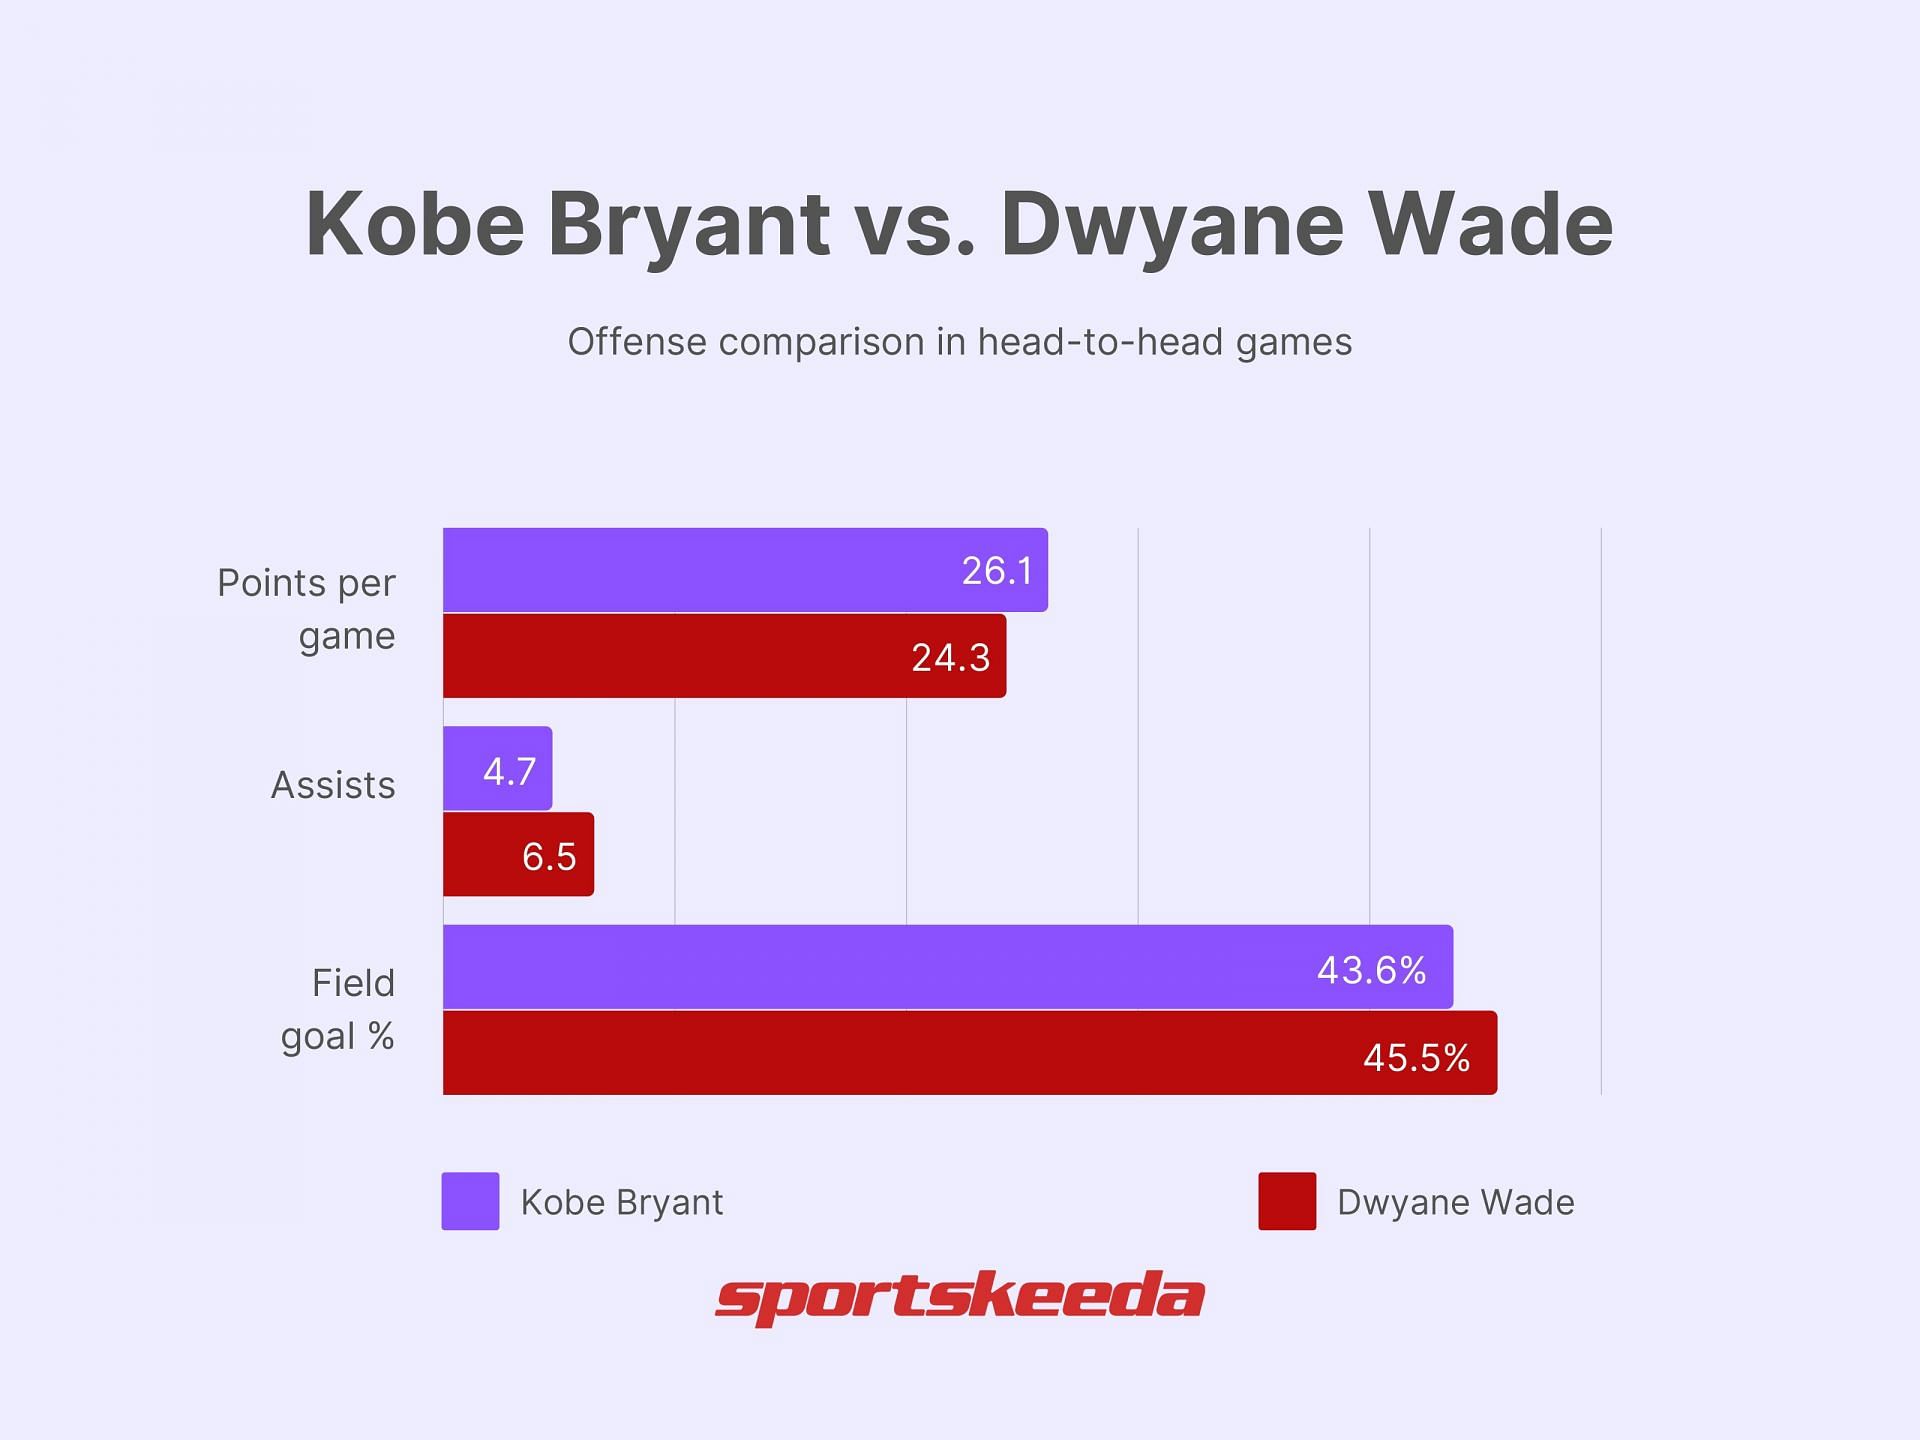 Kobe Bryant scored more points than Dwyane Wade, but his assist numbers were lower.